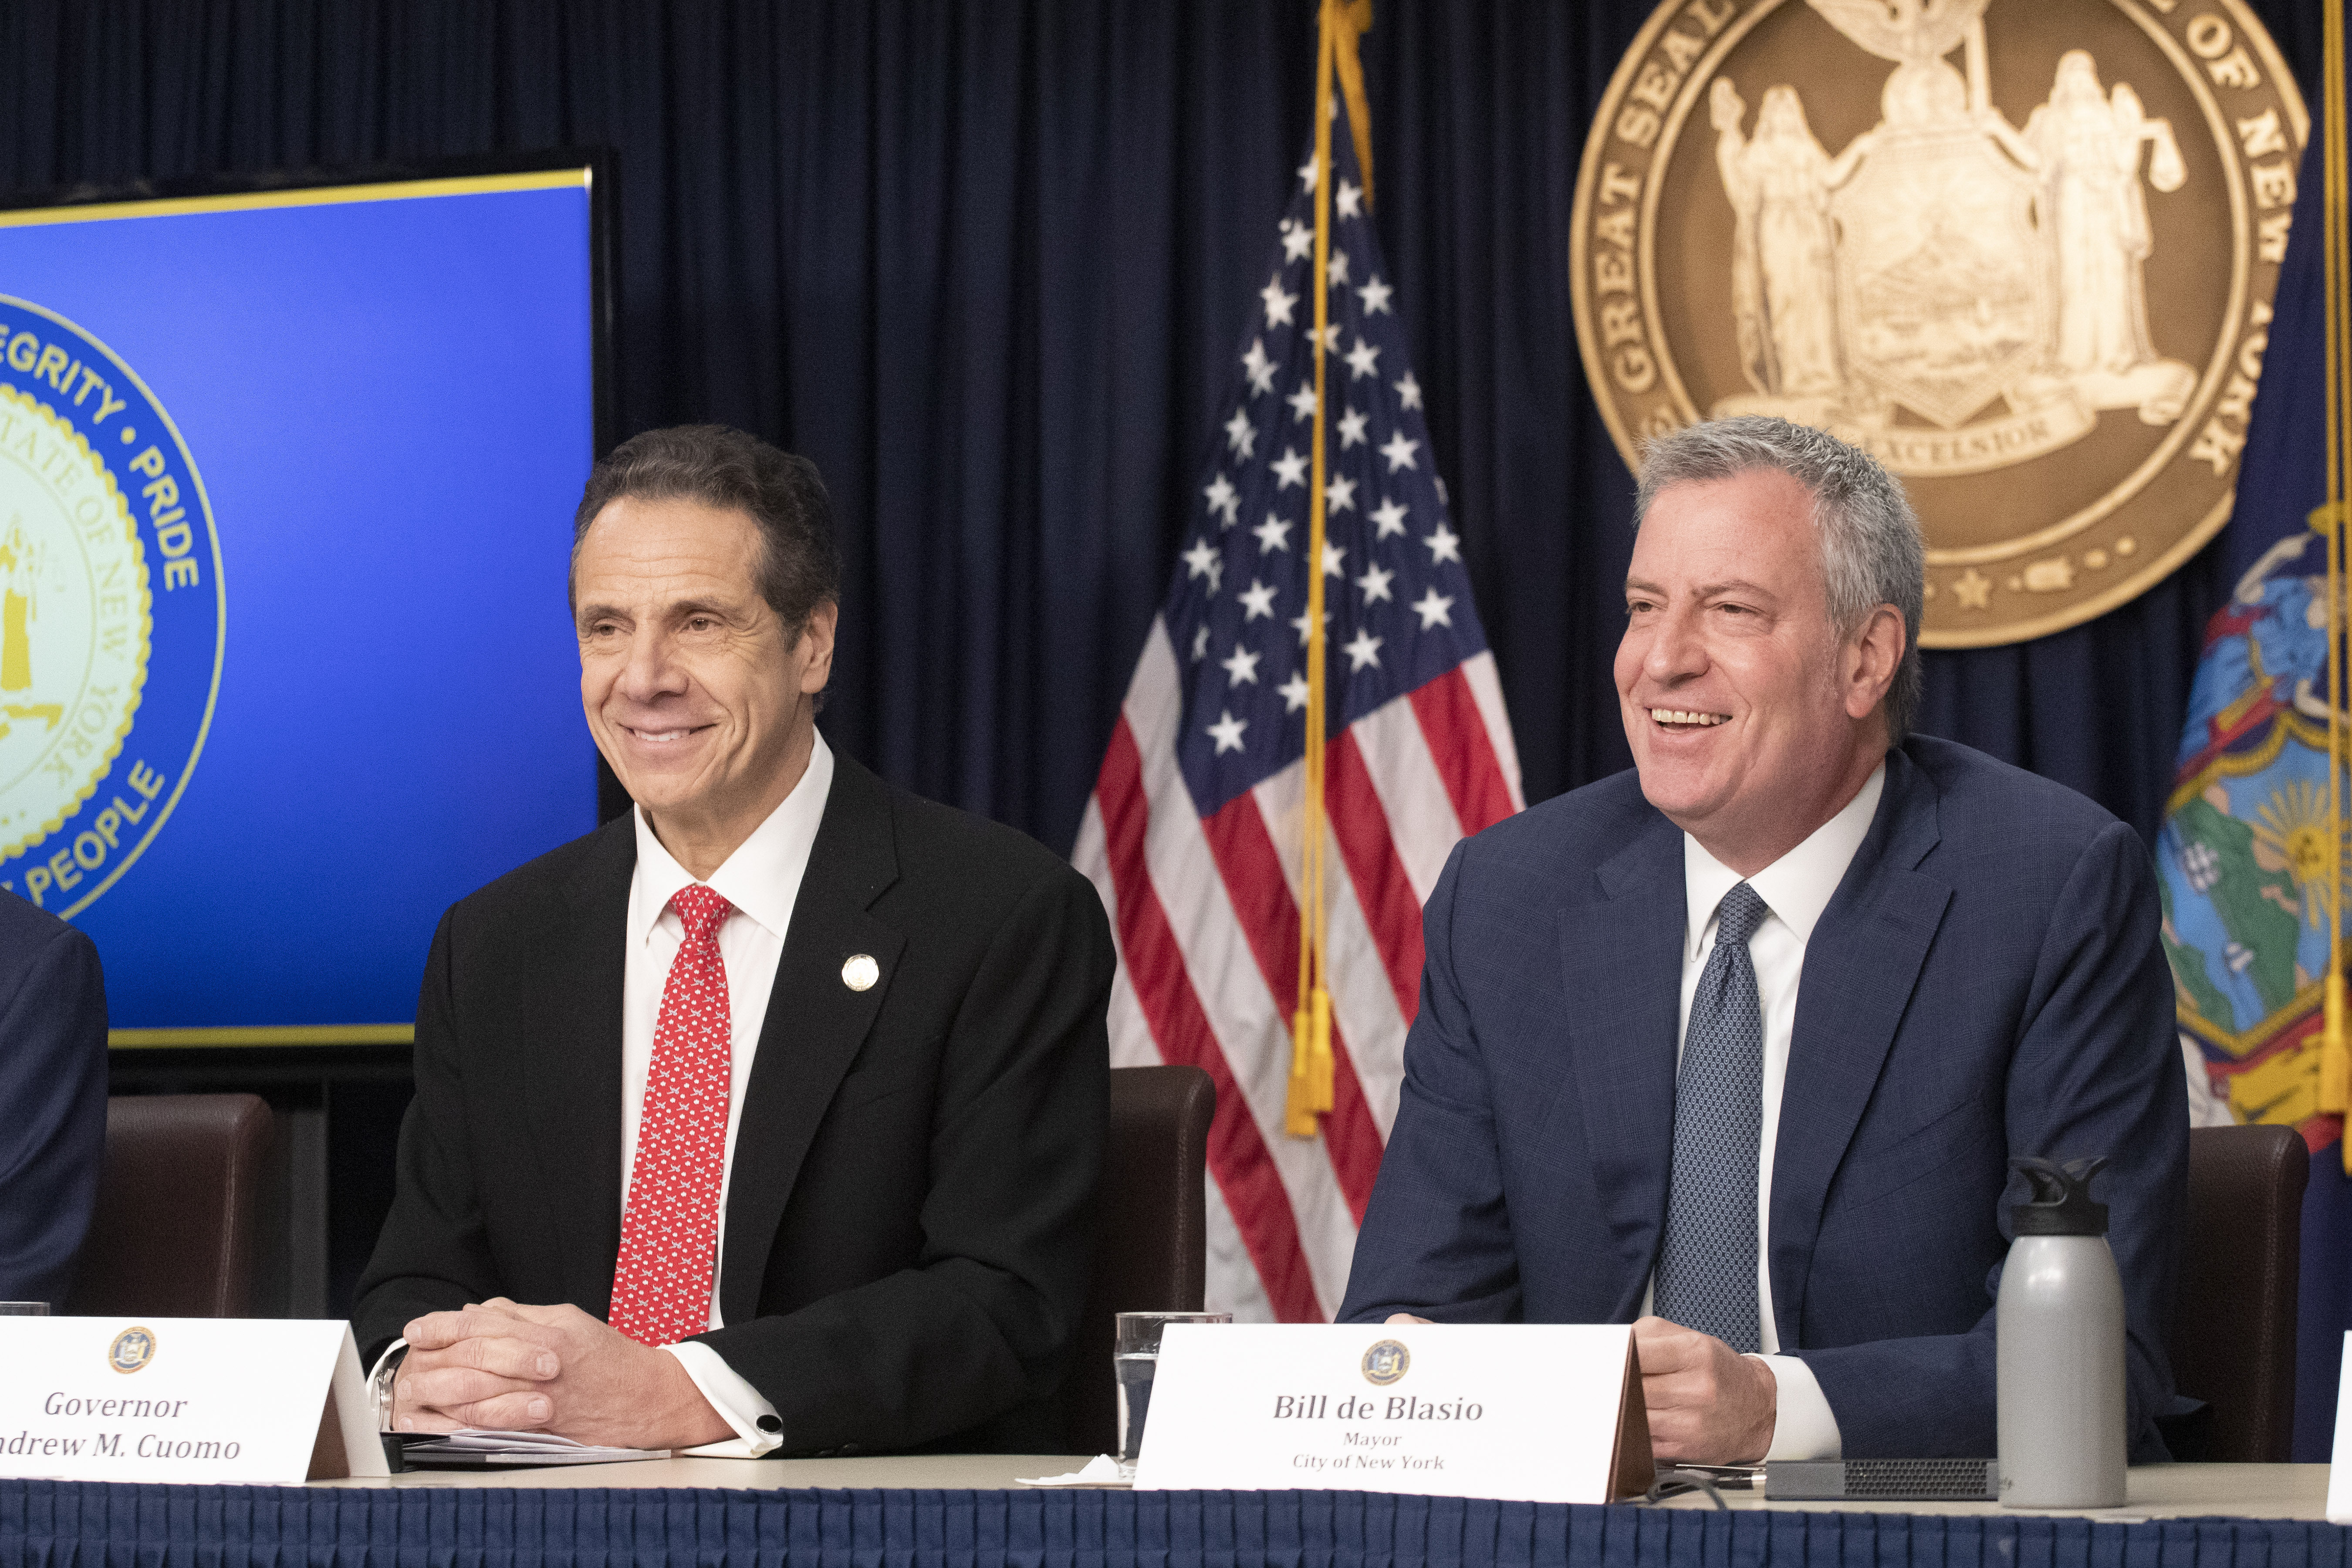 FILE - In this March 2, 2020 file photo New York Gov. Andrew Cuomo, left, and Mayor Bill de Blasio discuss the state and city's preparedness for the spread of coronavirus at a news conference in New York. A dustup over which of the two Democrats gets to say when New York City students can return to school was just the latest example of Cuomo tussling with de Blasio over who is in charge of the nation's most populous city. By Monday, April 13, 2020 the two leaders were still sending conflicting messages even as New York City sent out messages to students, families and teachers that distance learning will continue through June. (AP Photo/Mark Lennihan)